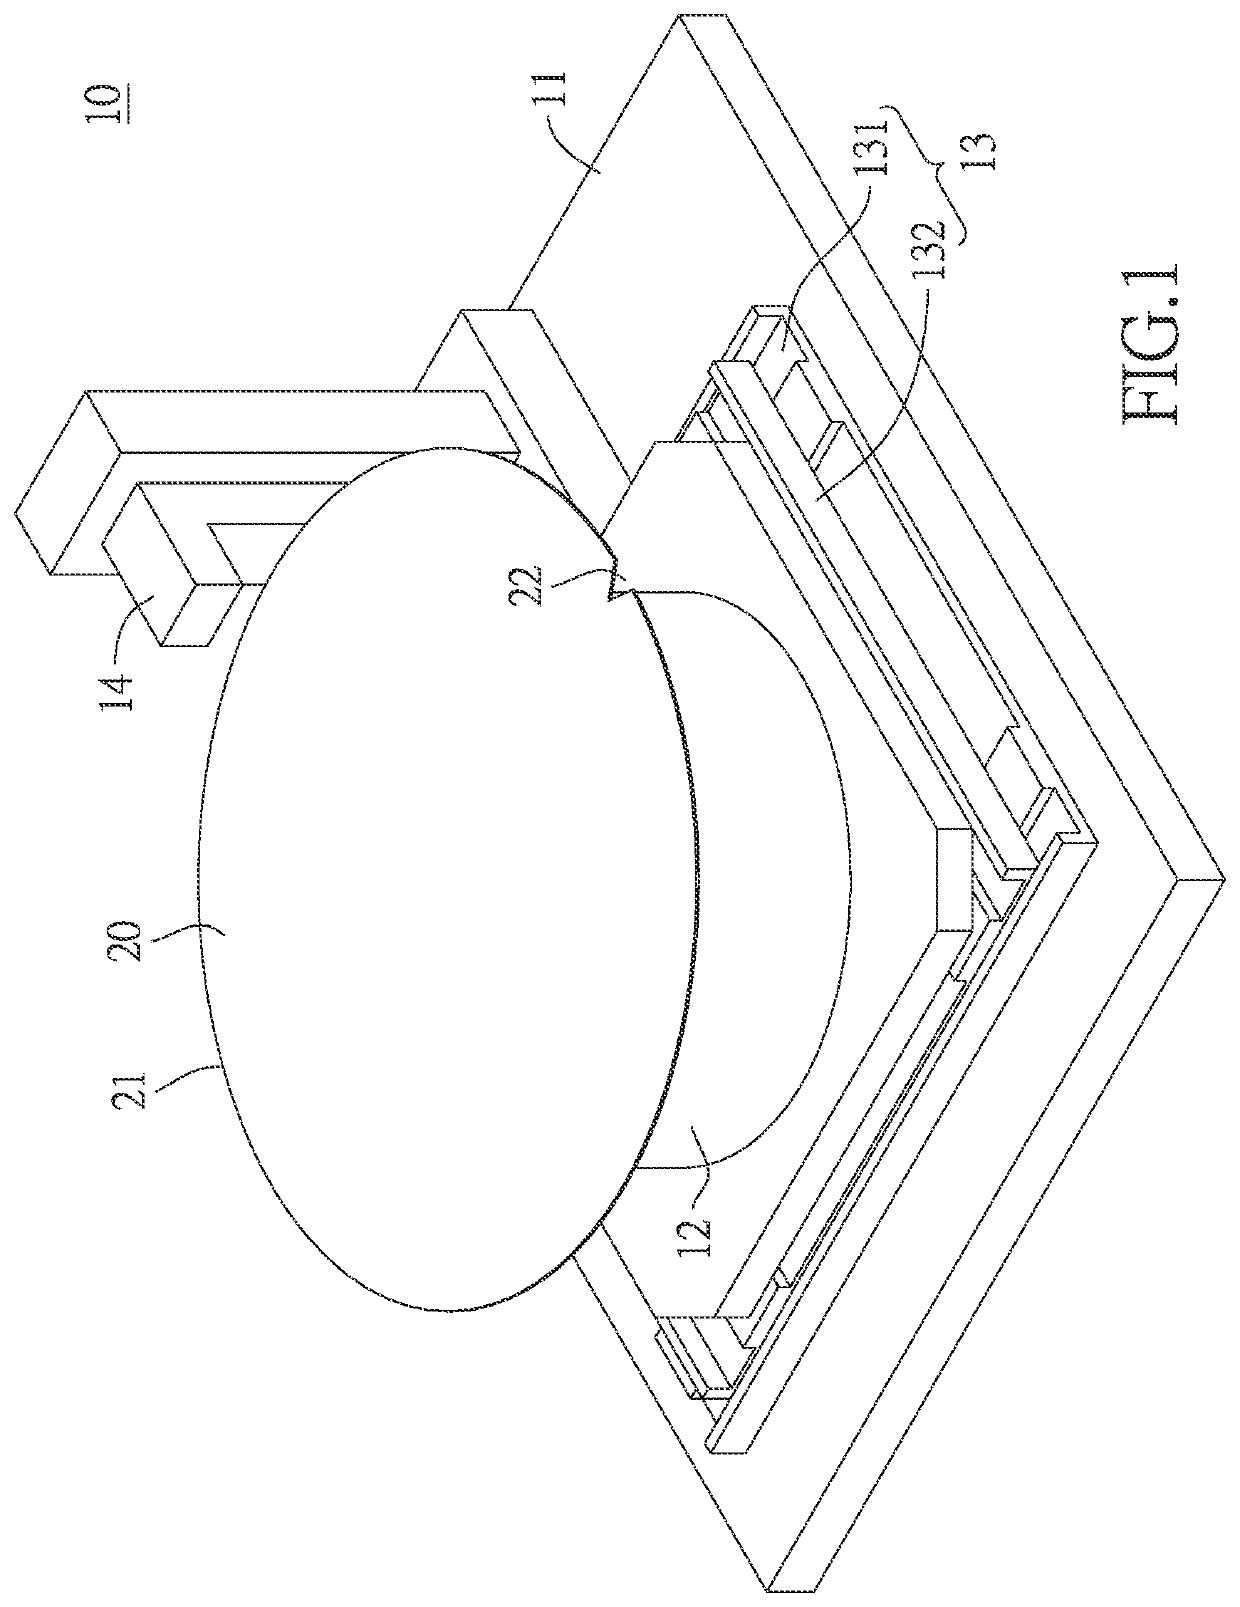 Method and Apparatus for Detecting Positions of Wafers